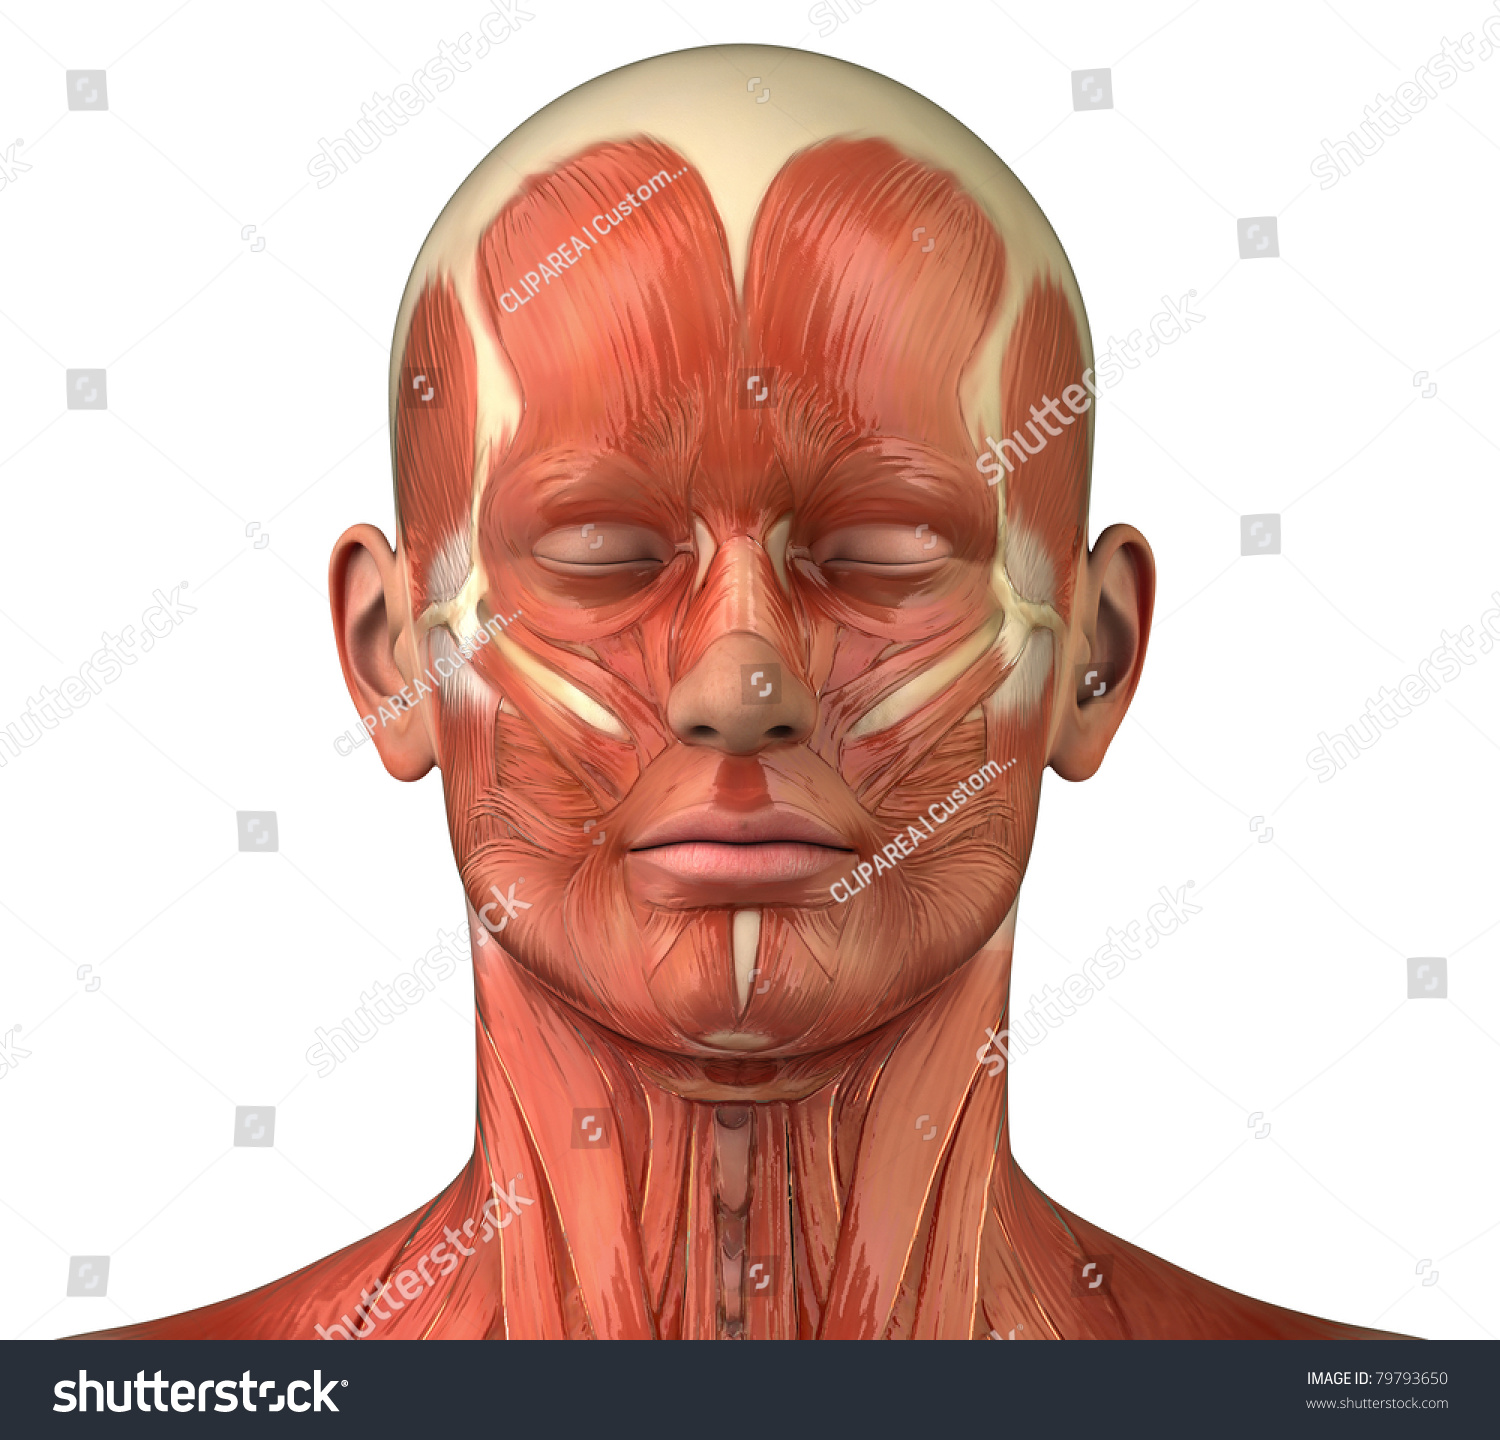 Human Head Muscles Diagram - Muscles of the Upper Arm - Anatomy